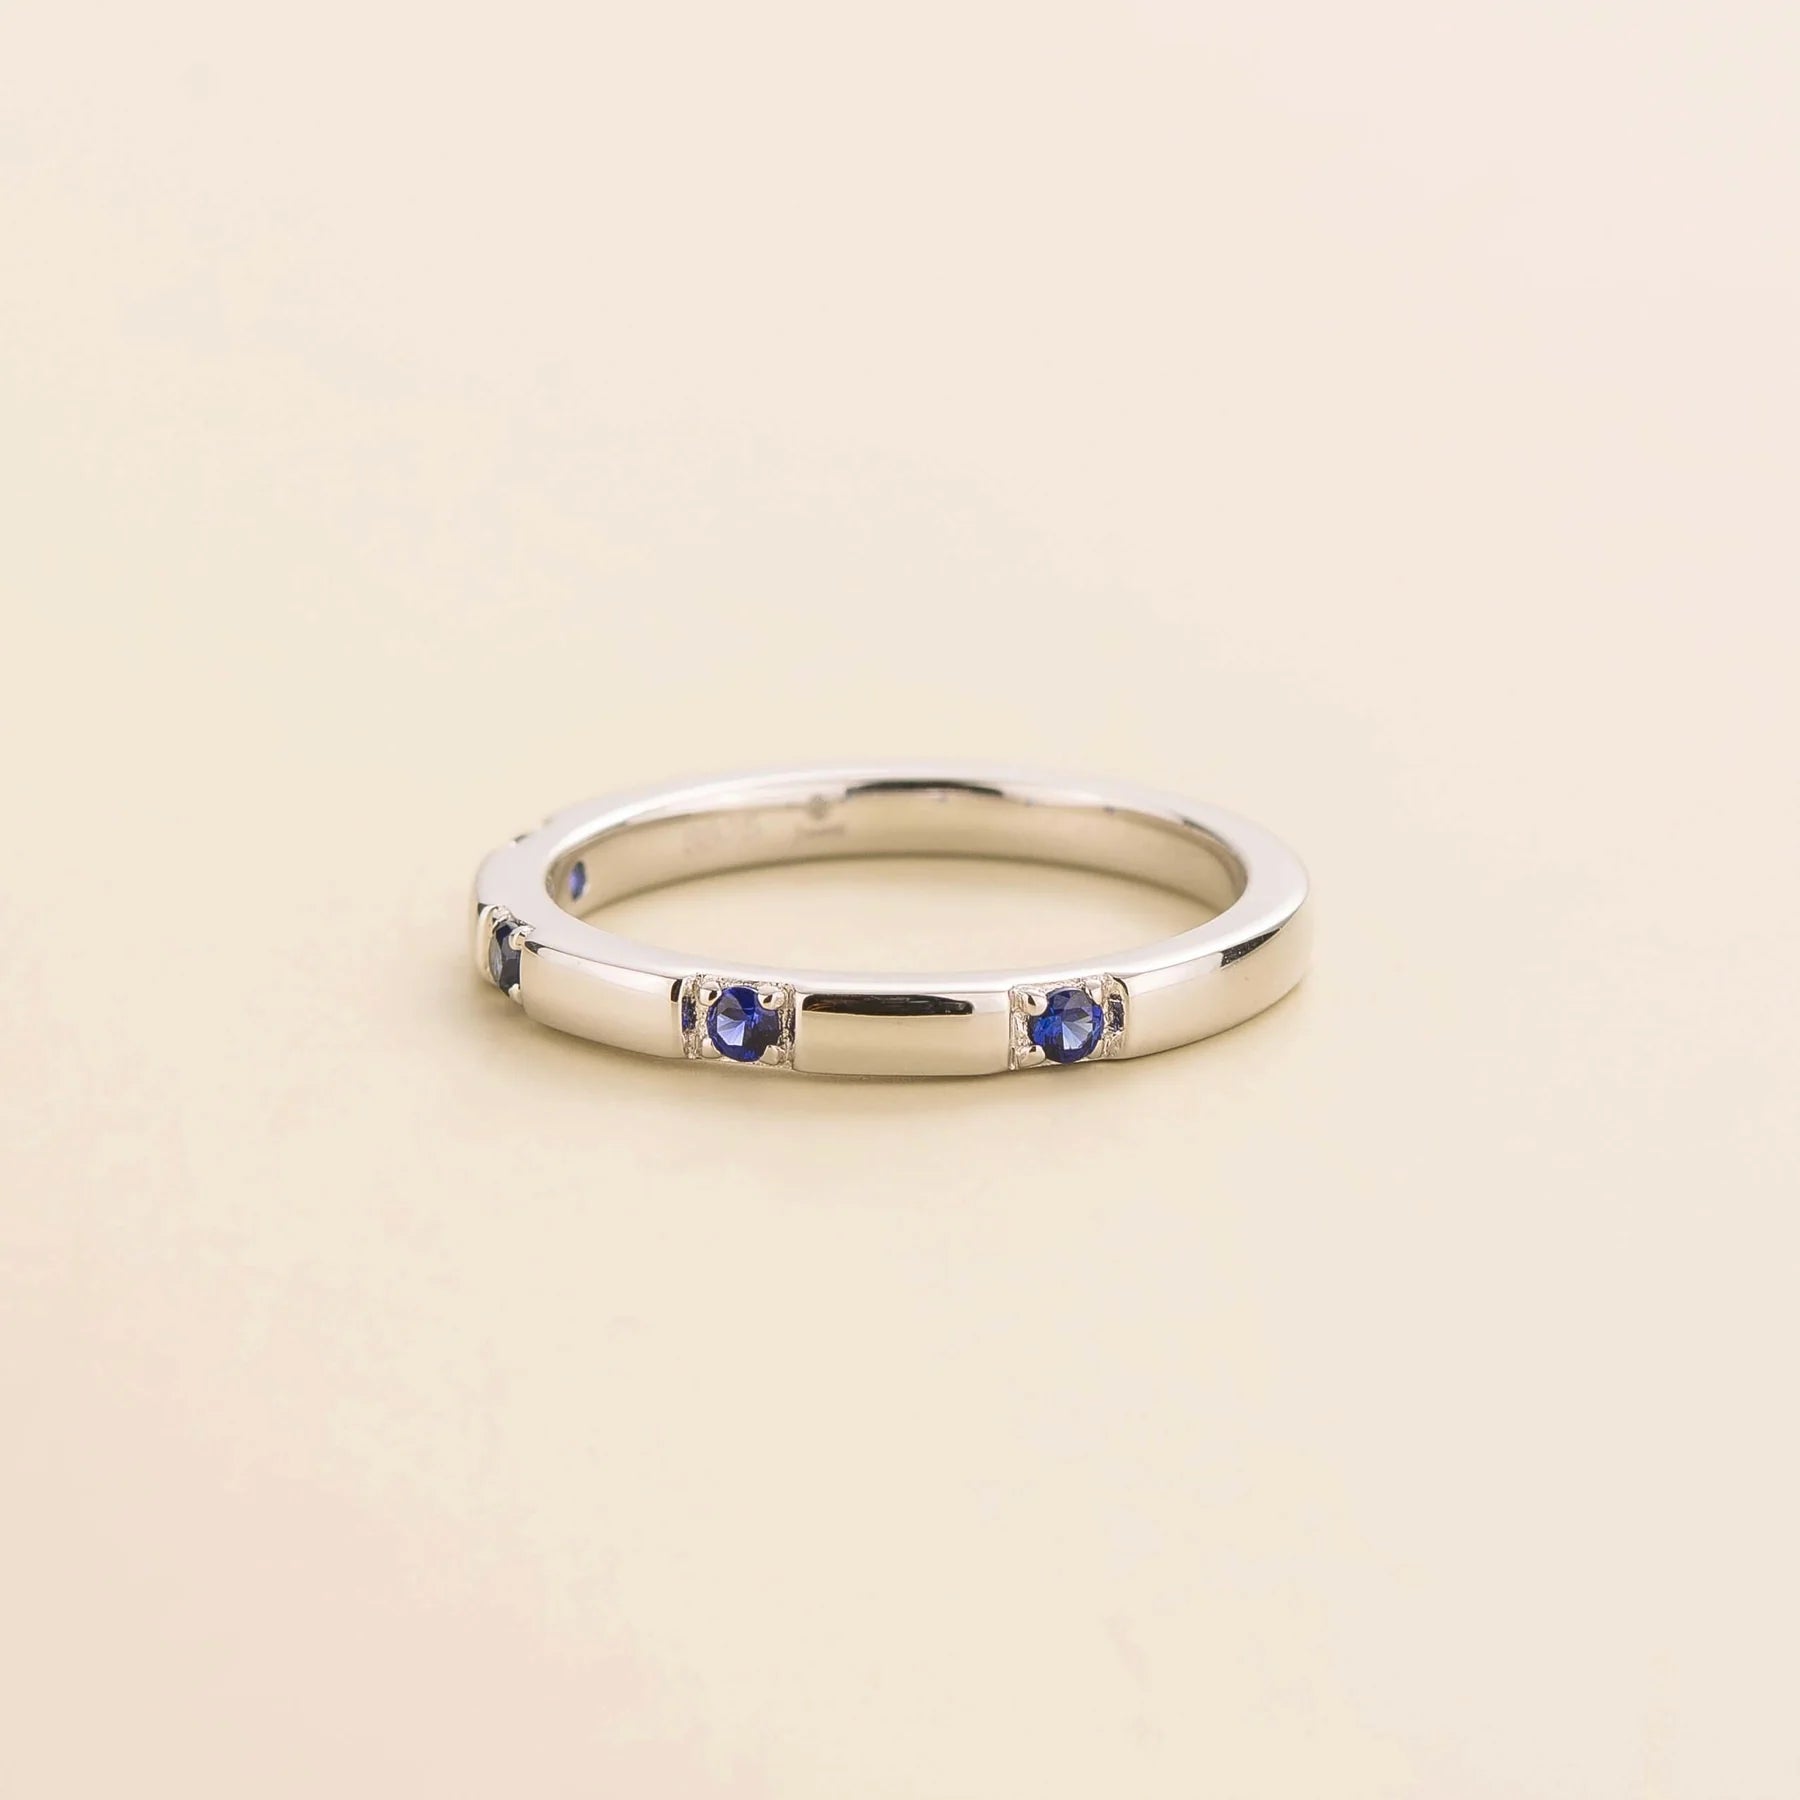 Balans White Gold Ring Set With Blue Sapphire Bespoke Jewellery From London